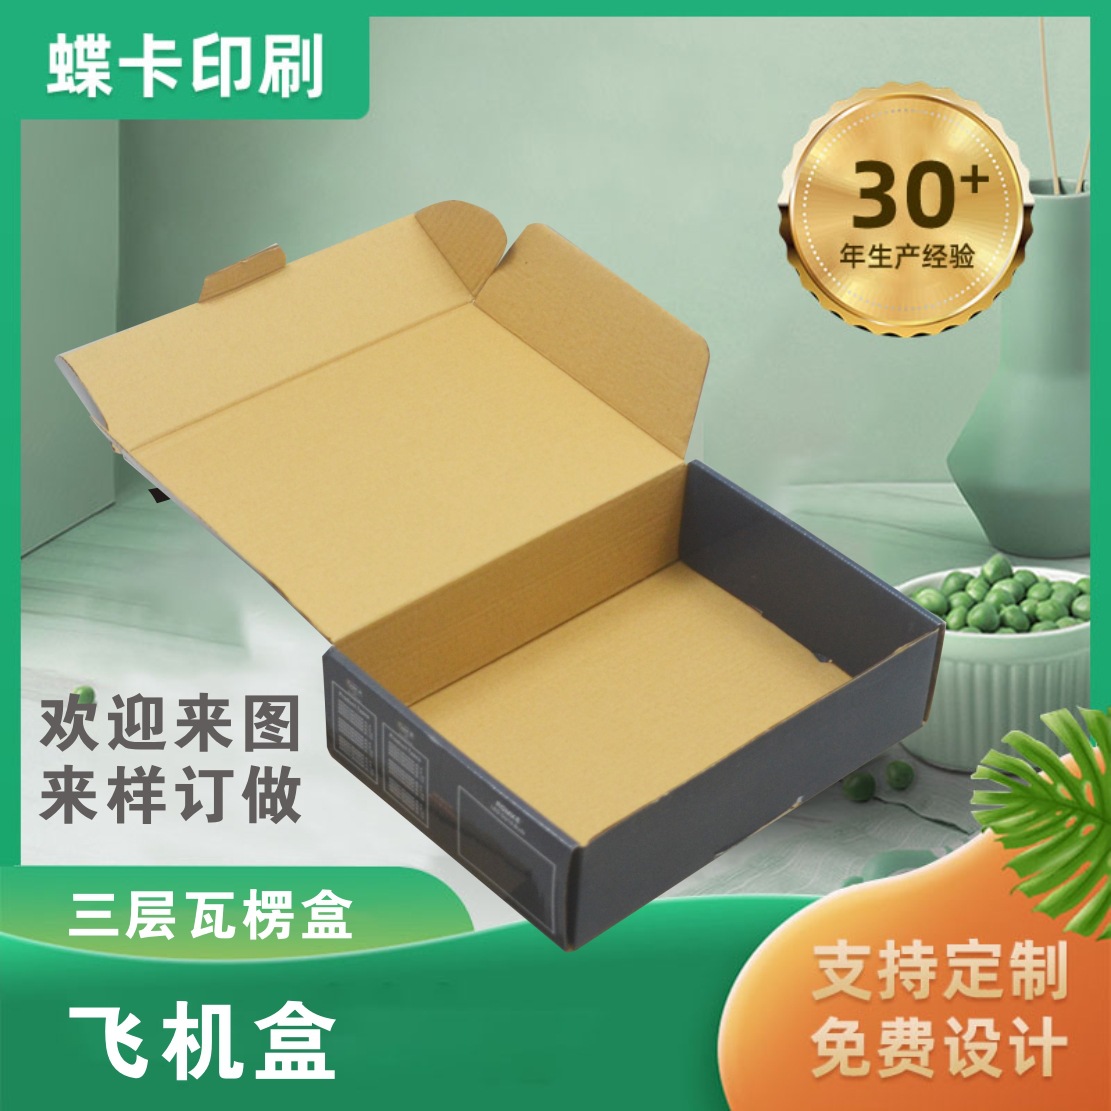 Packaging and Printing LED Lighting packaging Paper packaging box LED Universal color box Aircraft Box Kraft paper Customized